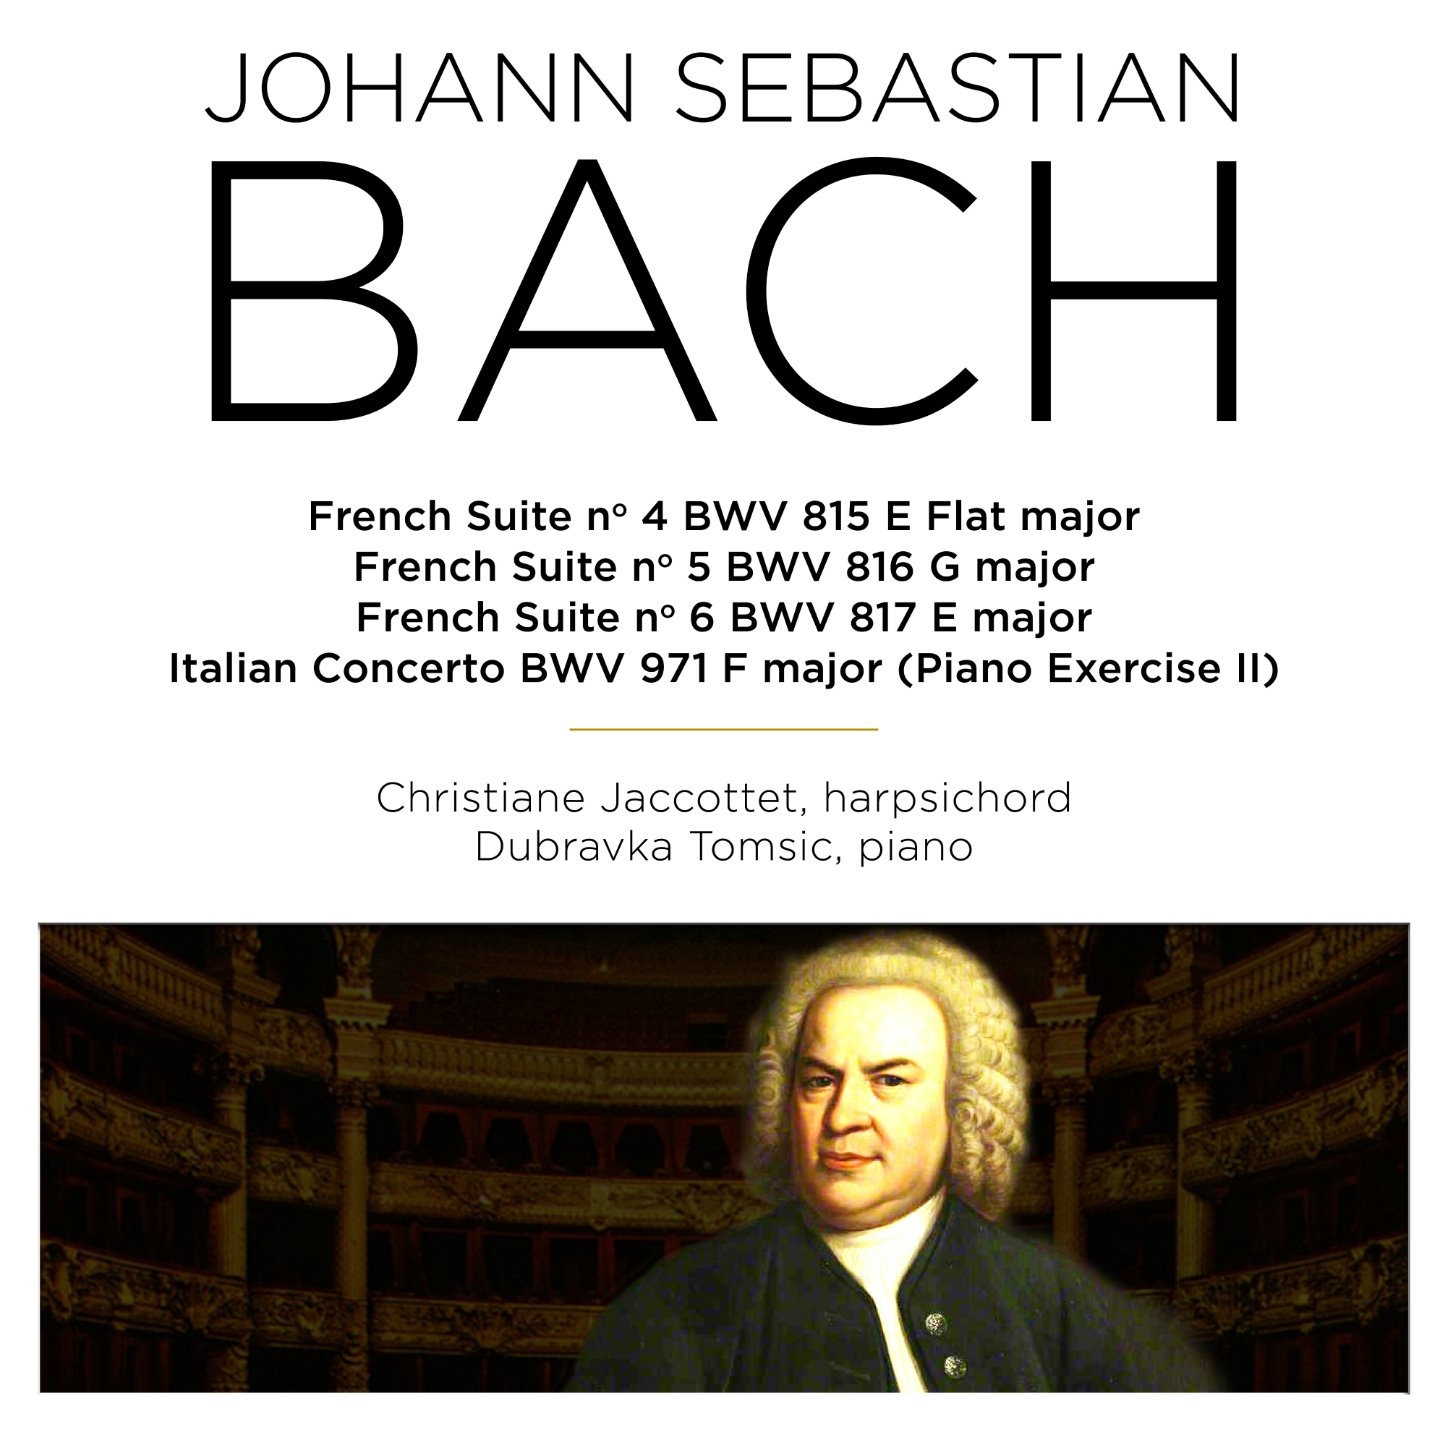 French Suite No. 6 in E Major, BWV 817:I. Allemande